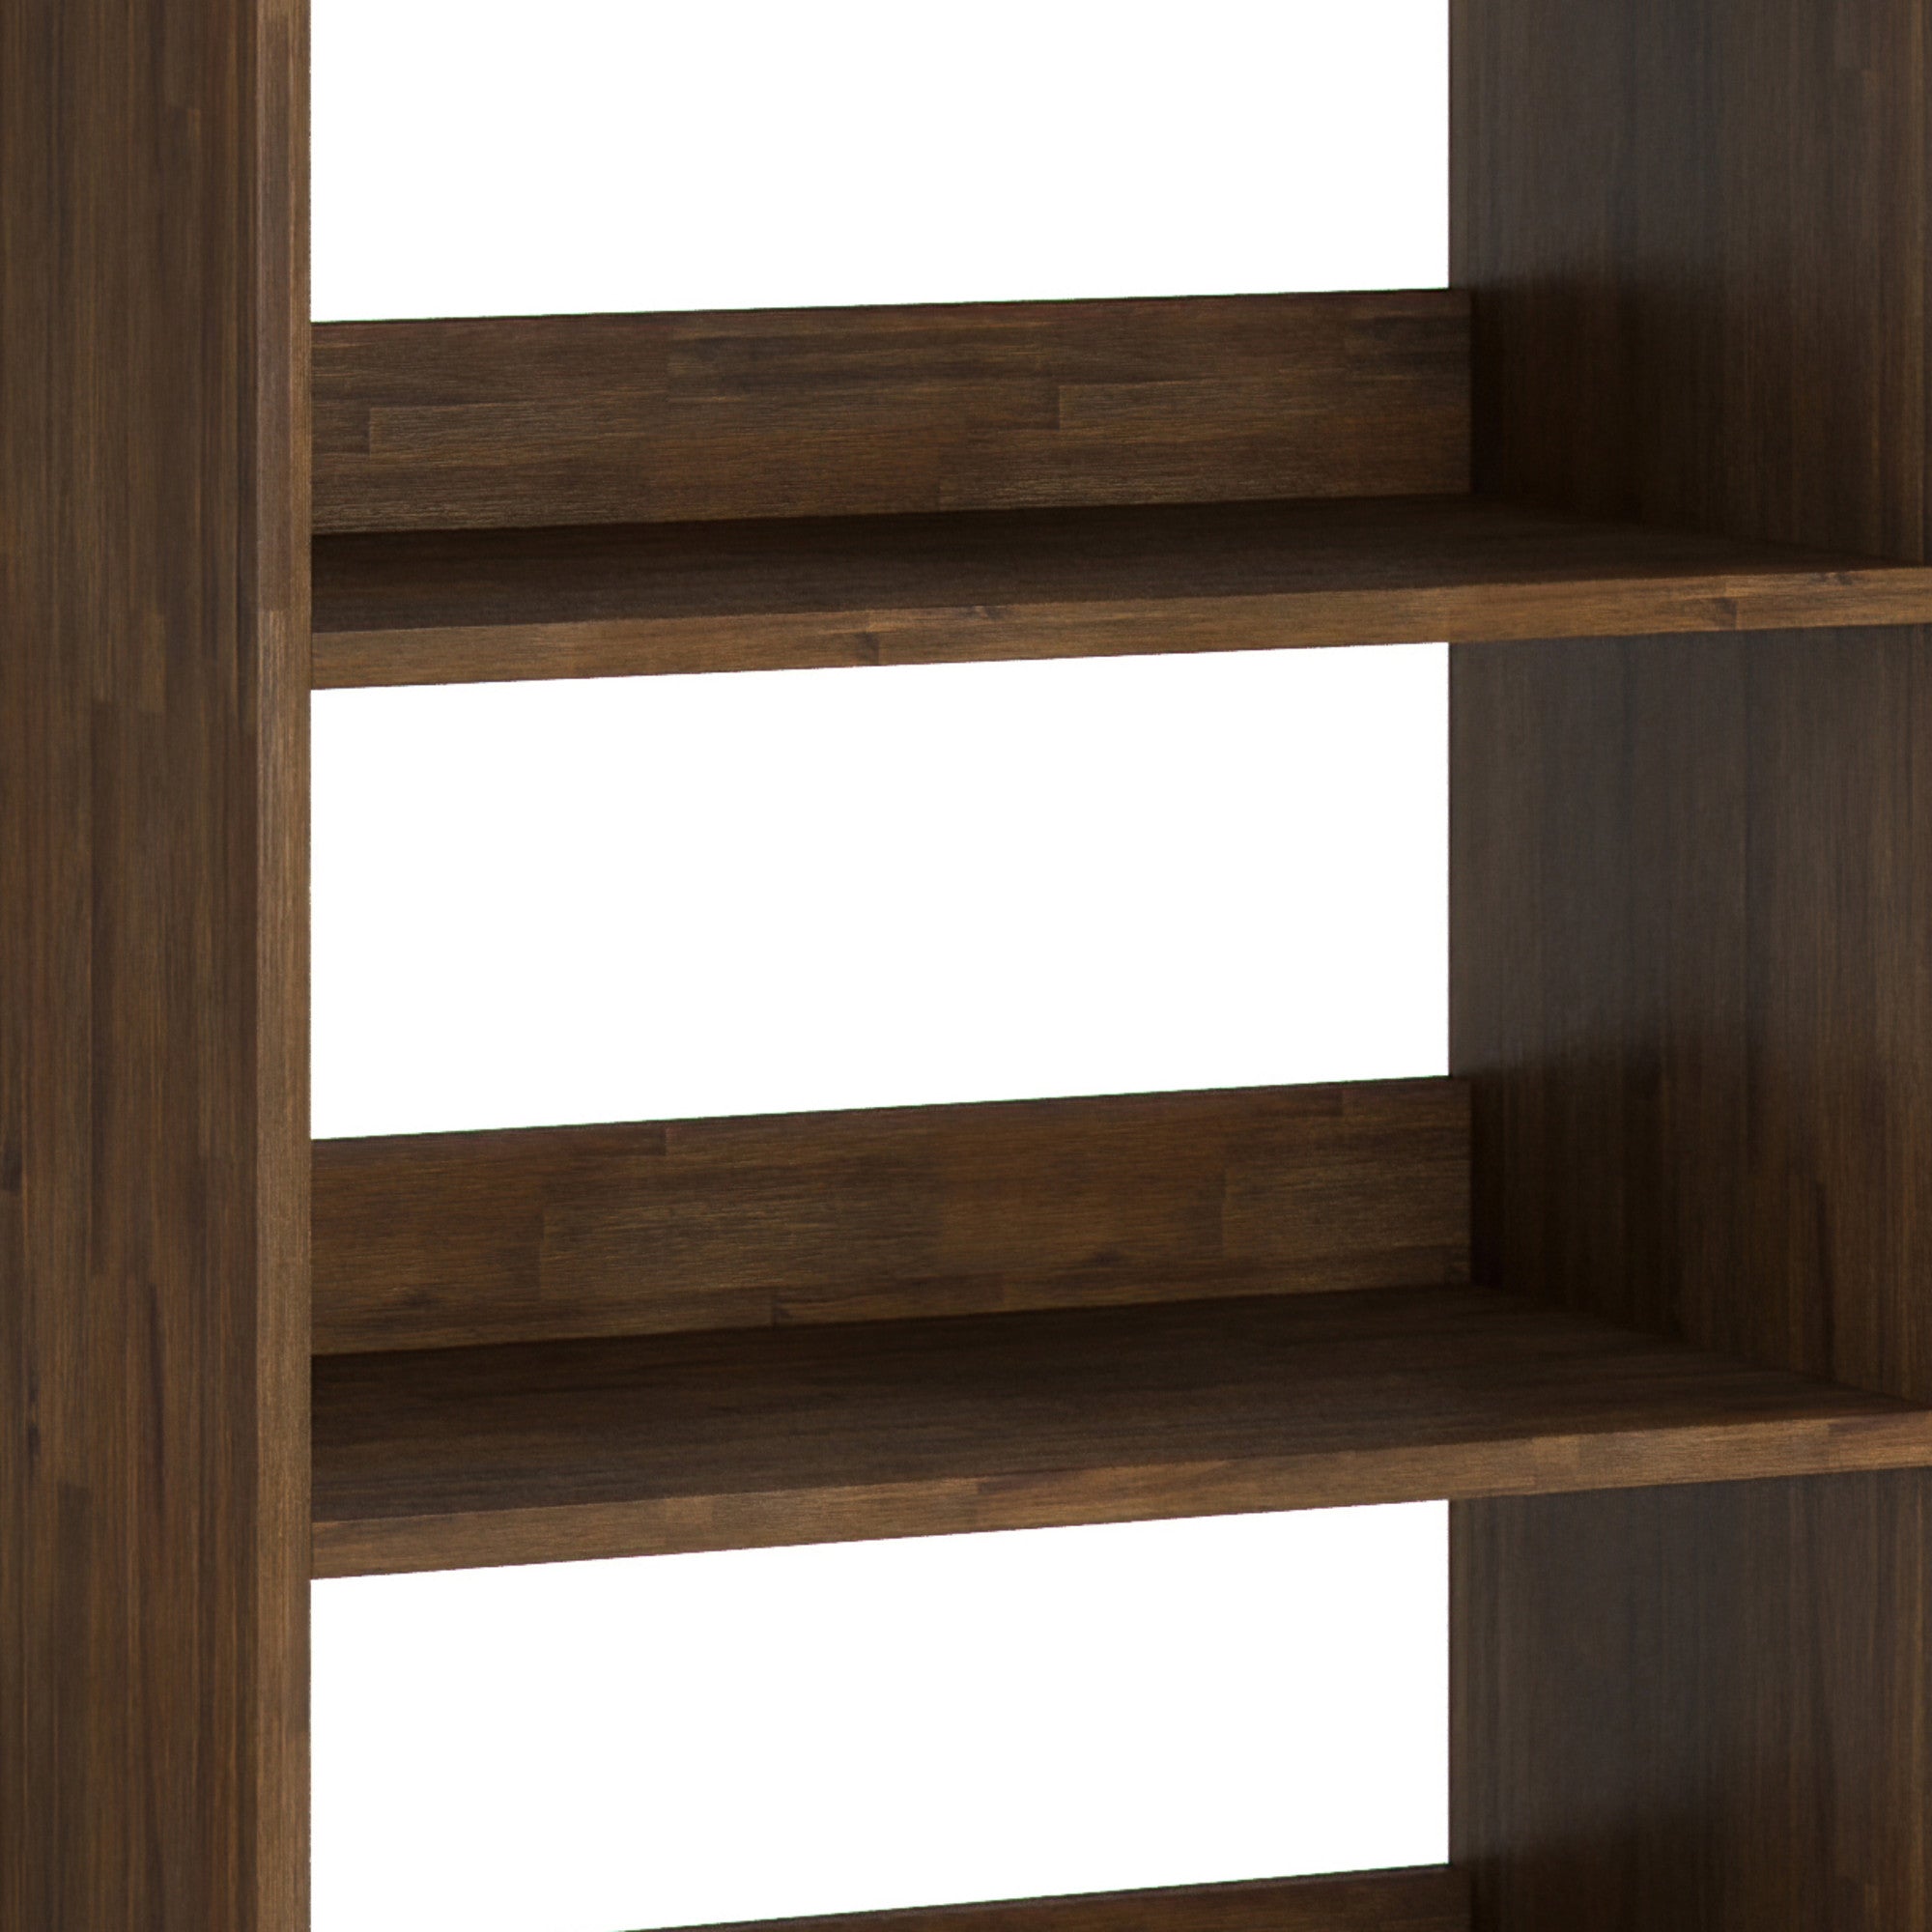 Chase Tall Bookcase